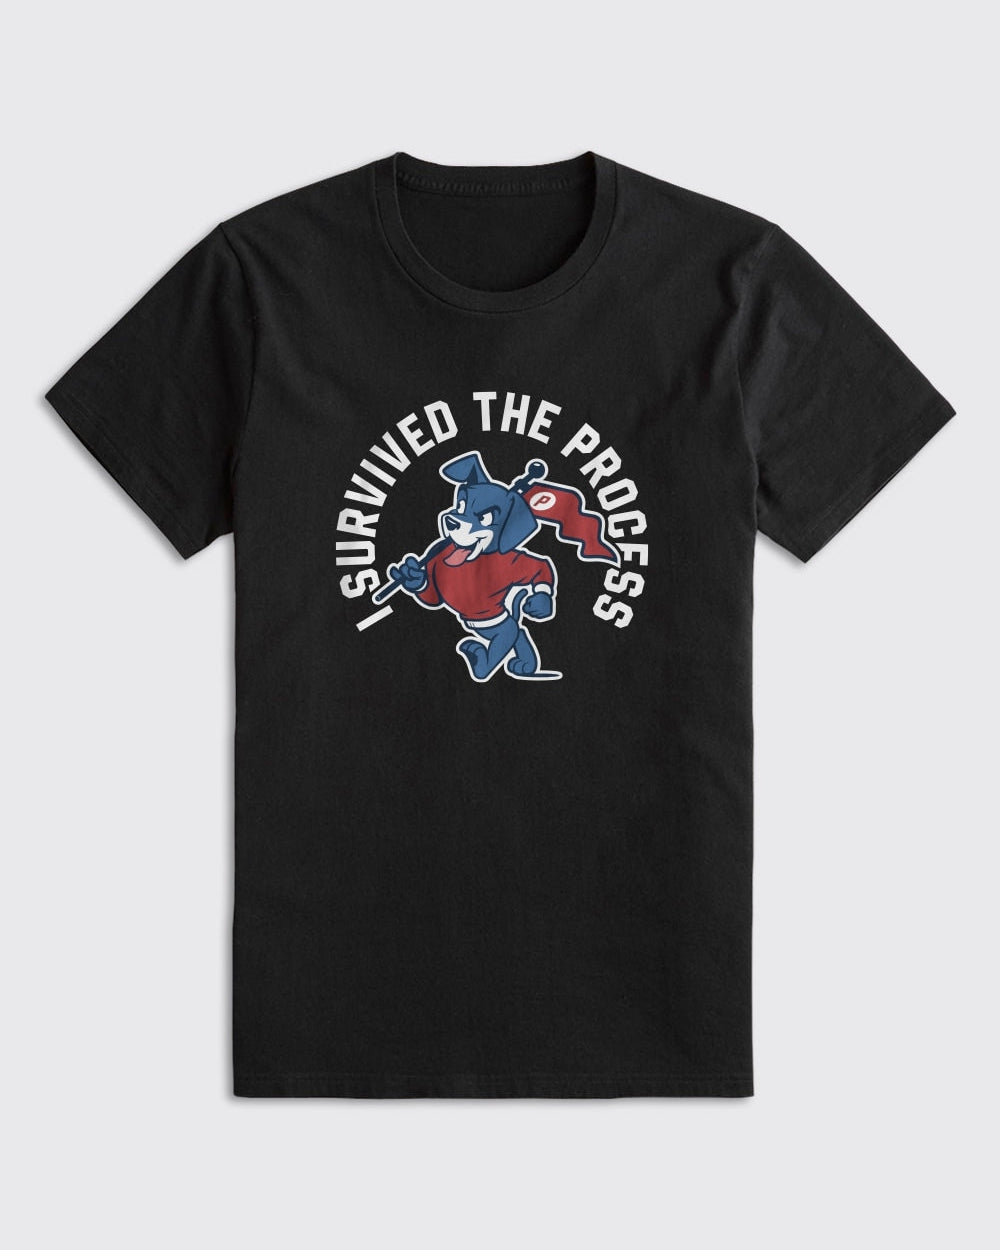 I Survived The Process Shirt - 76ers, T-Shirts - Philly Sports Shirts